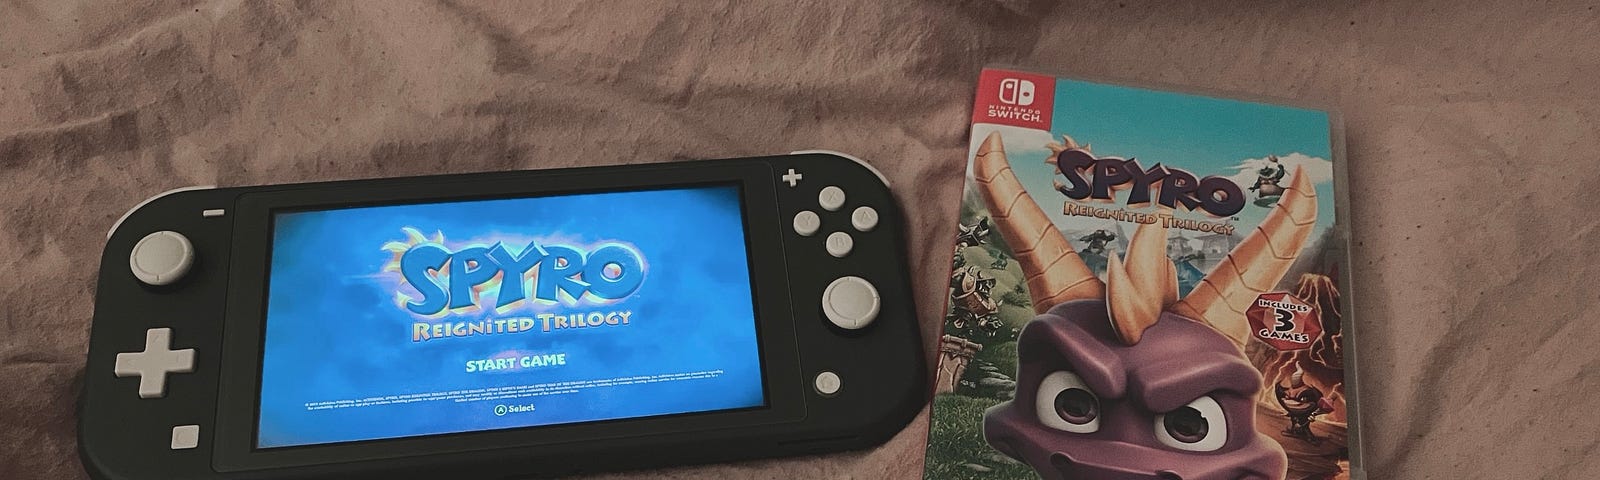 A gray Nintendo switch lite with the Spyro the Dragon: Reignited Trilogy home screen on the left. Next to the switch is the case for the Spyro game. Both lying flat on a pink blanket.